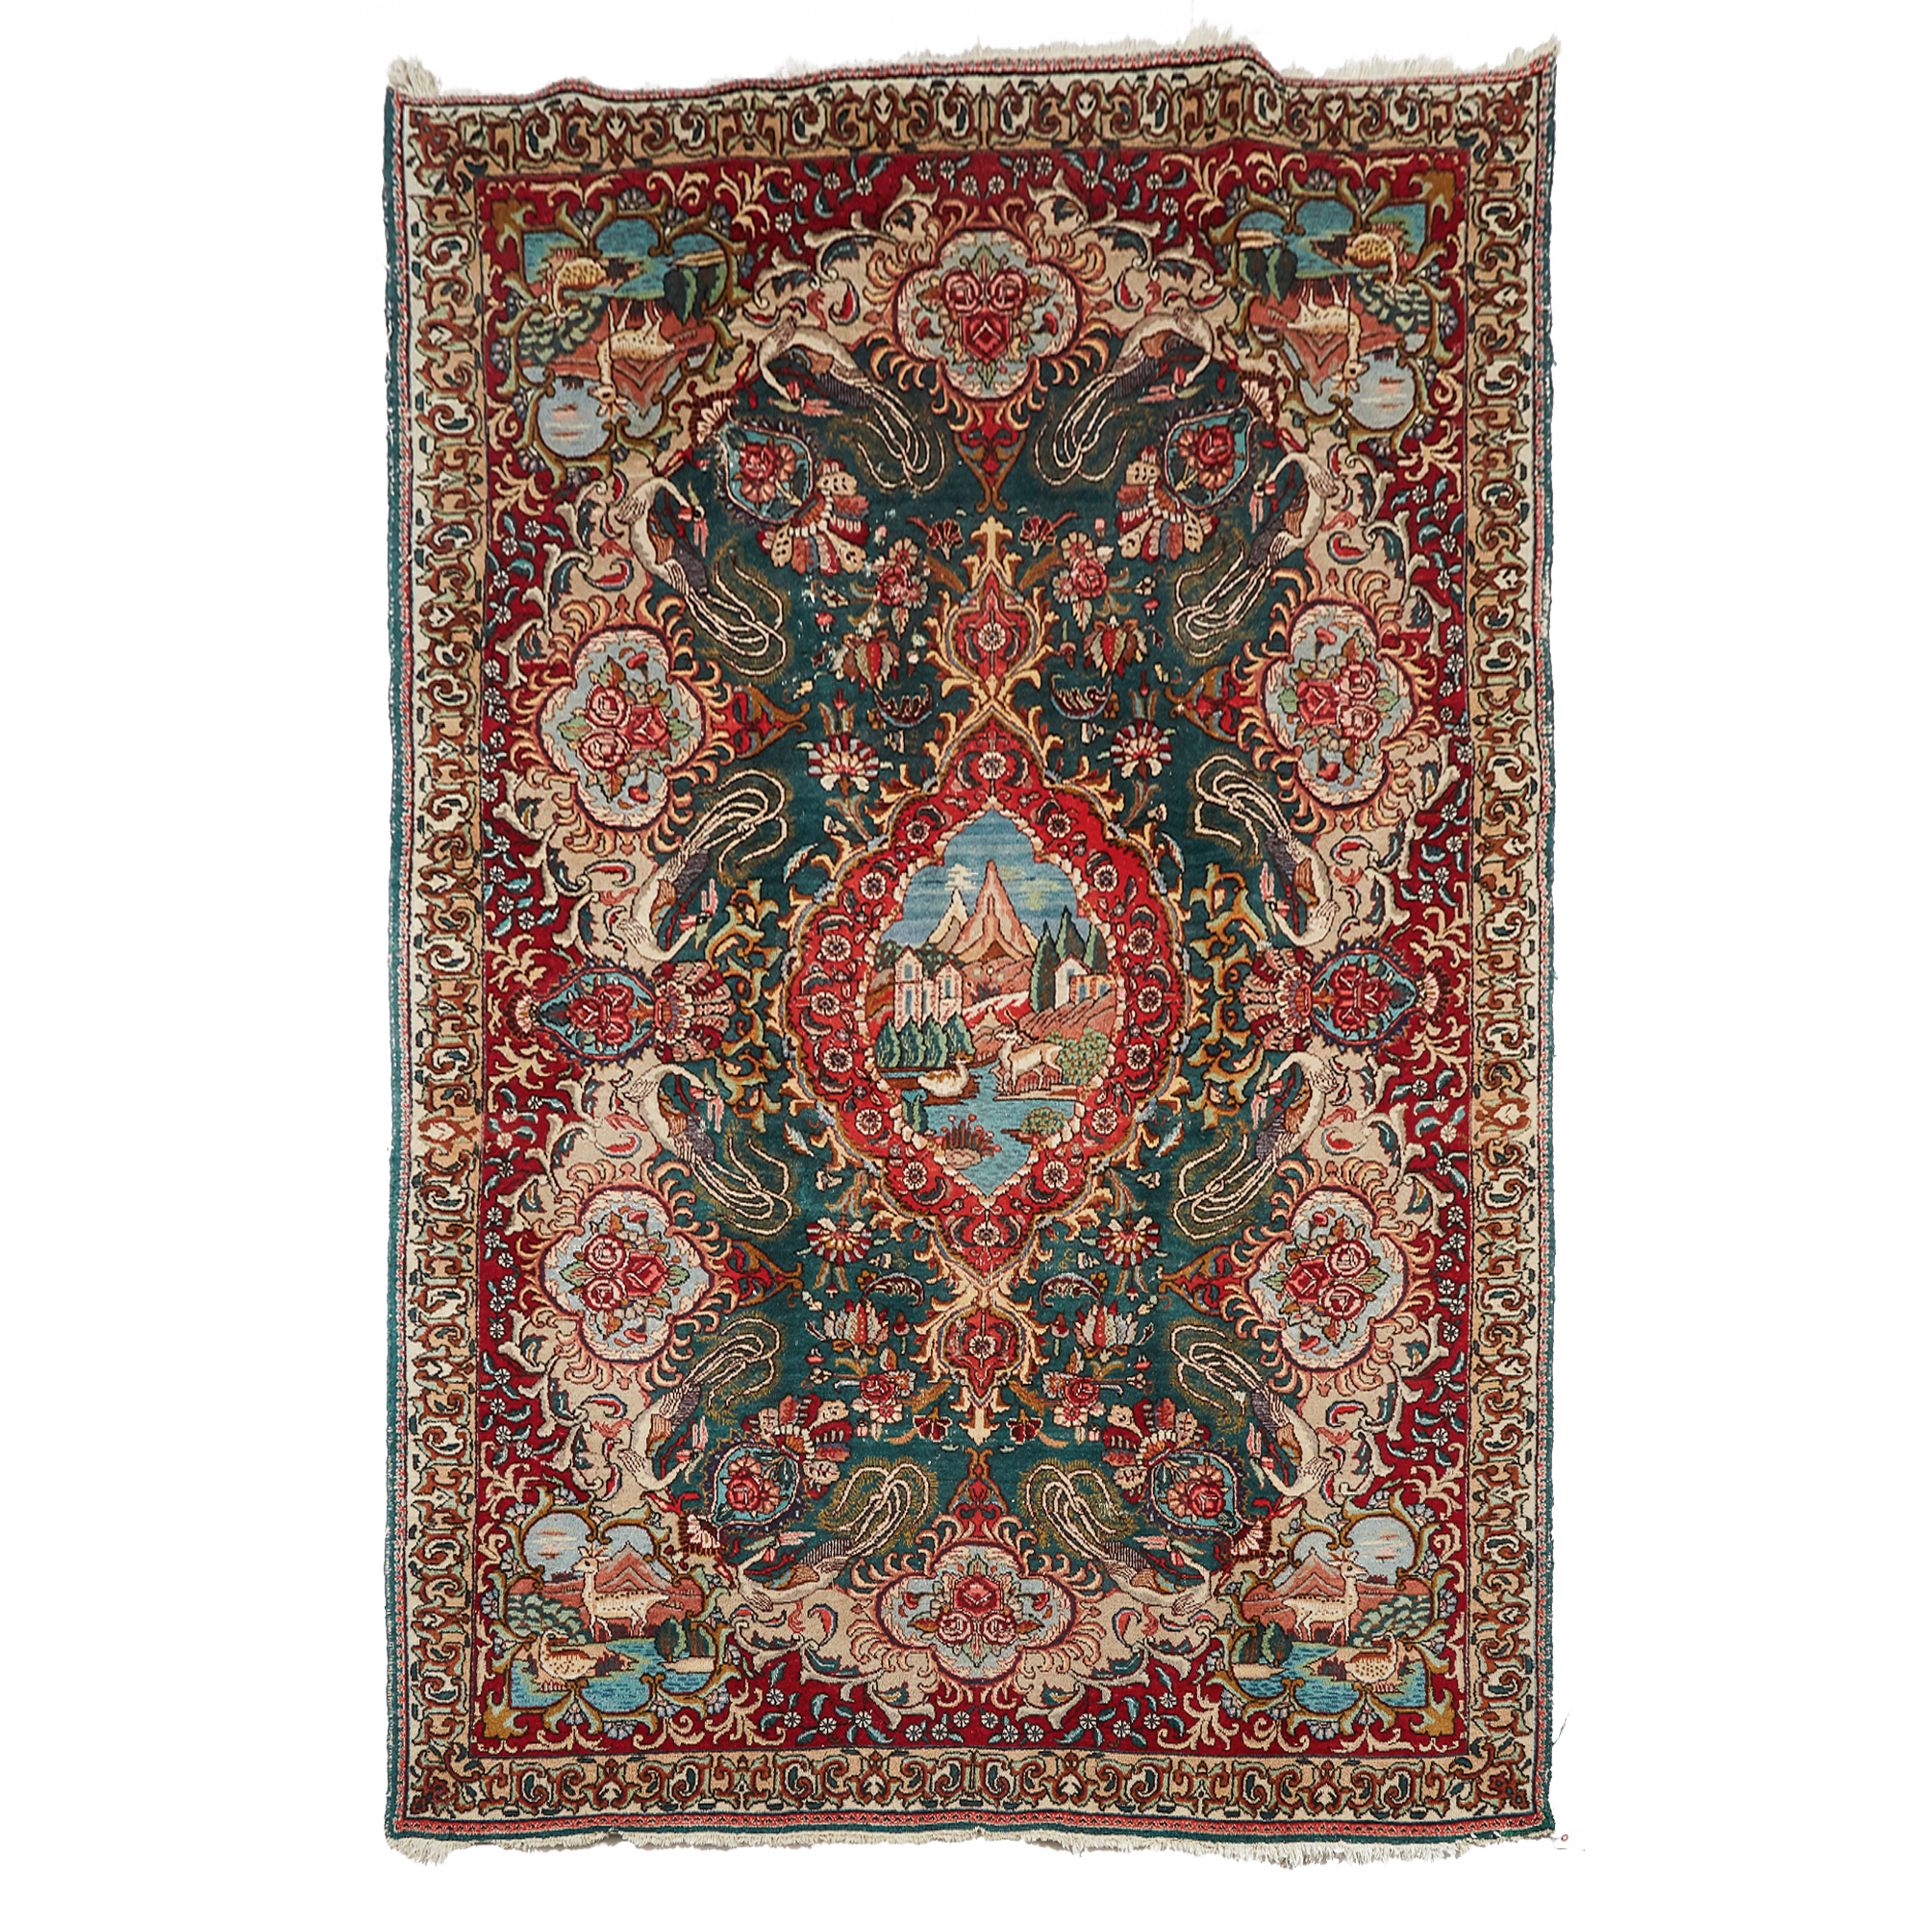 Pictorial Tabriz Carpet, Persian, early to mid 20th century